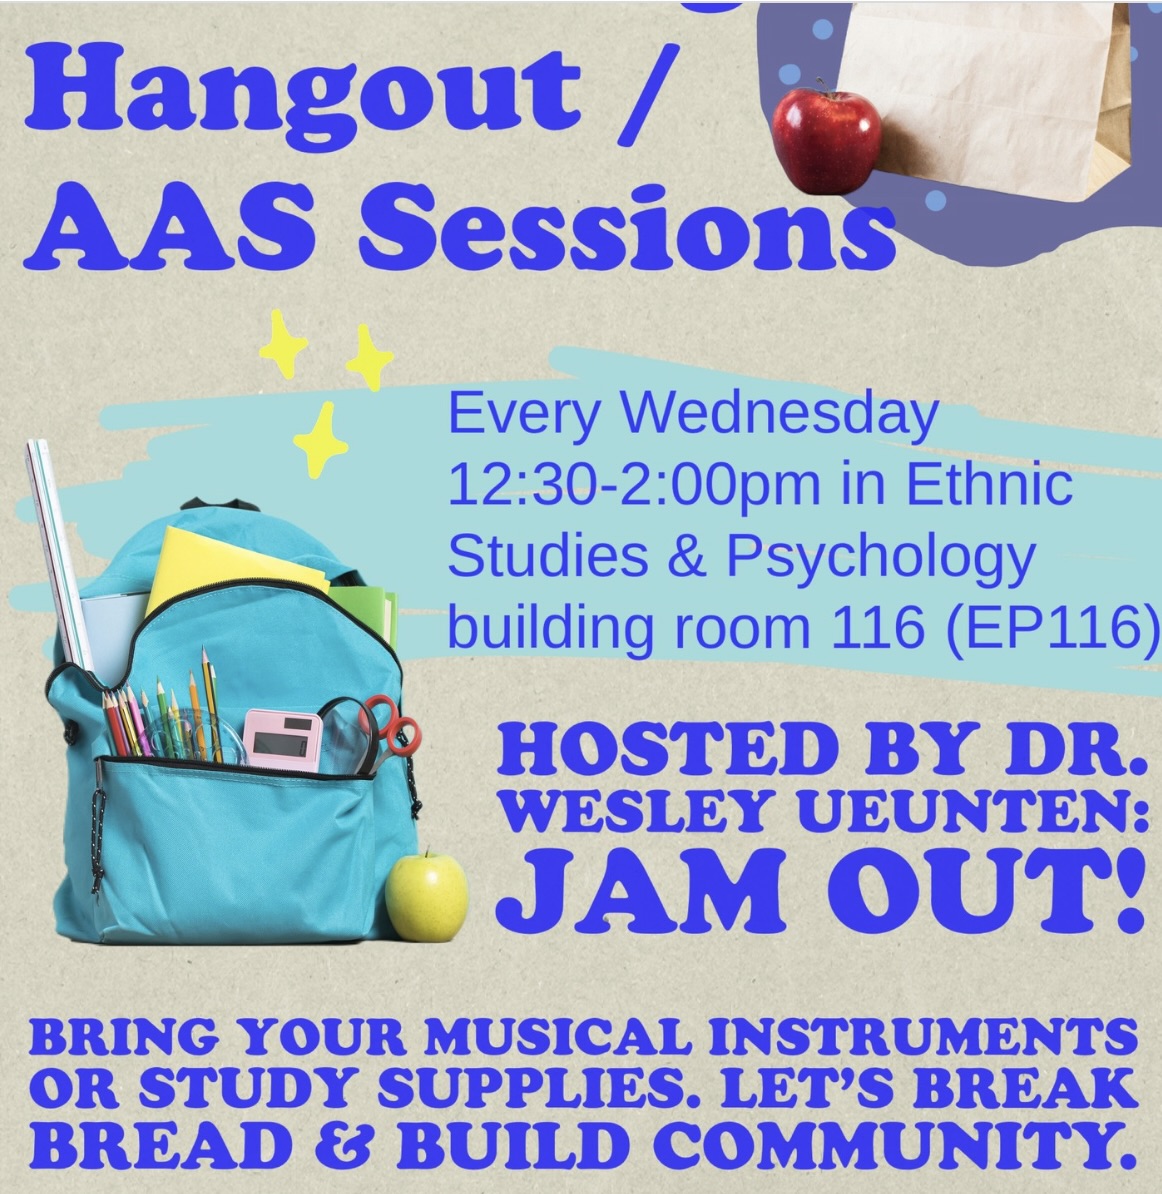 Hangout/AAS Sessions